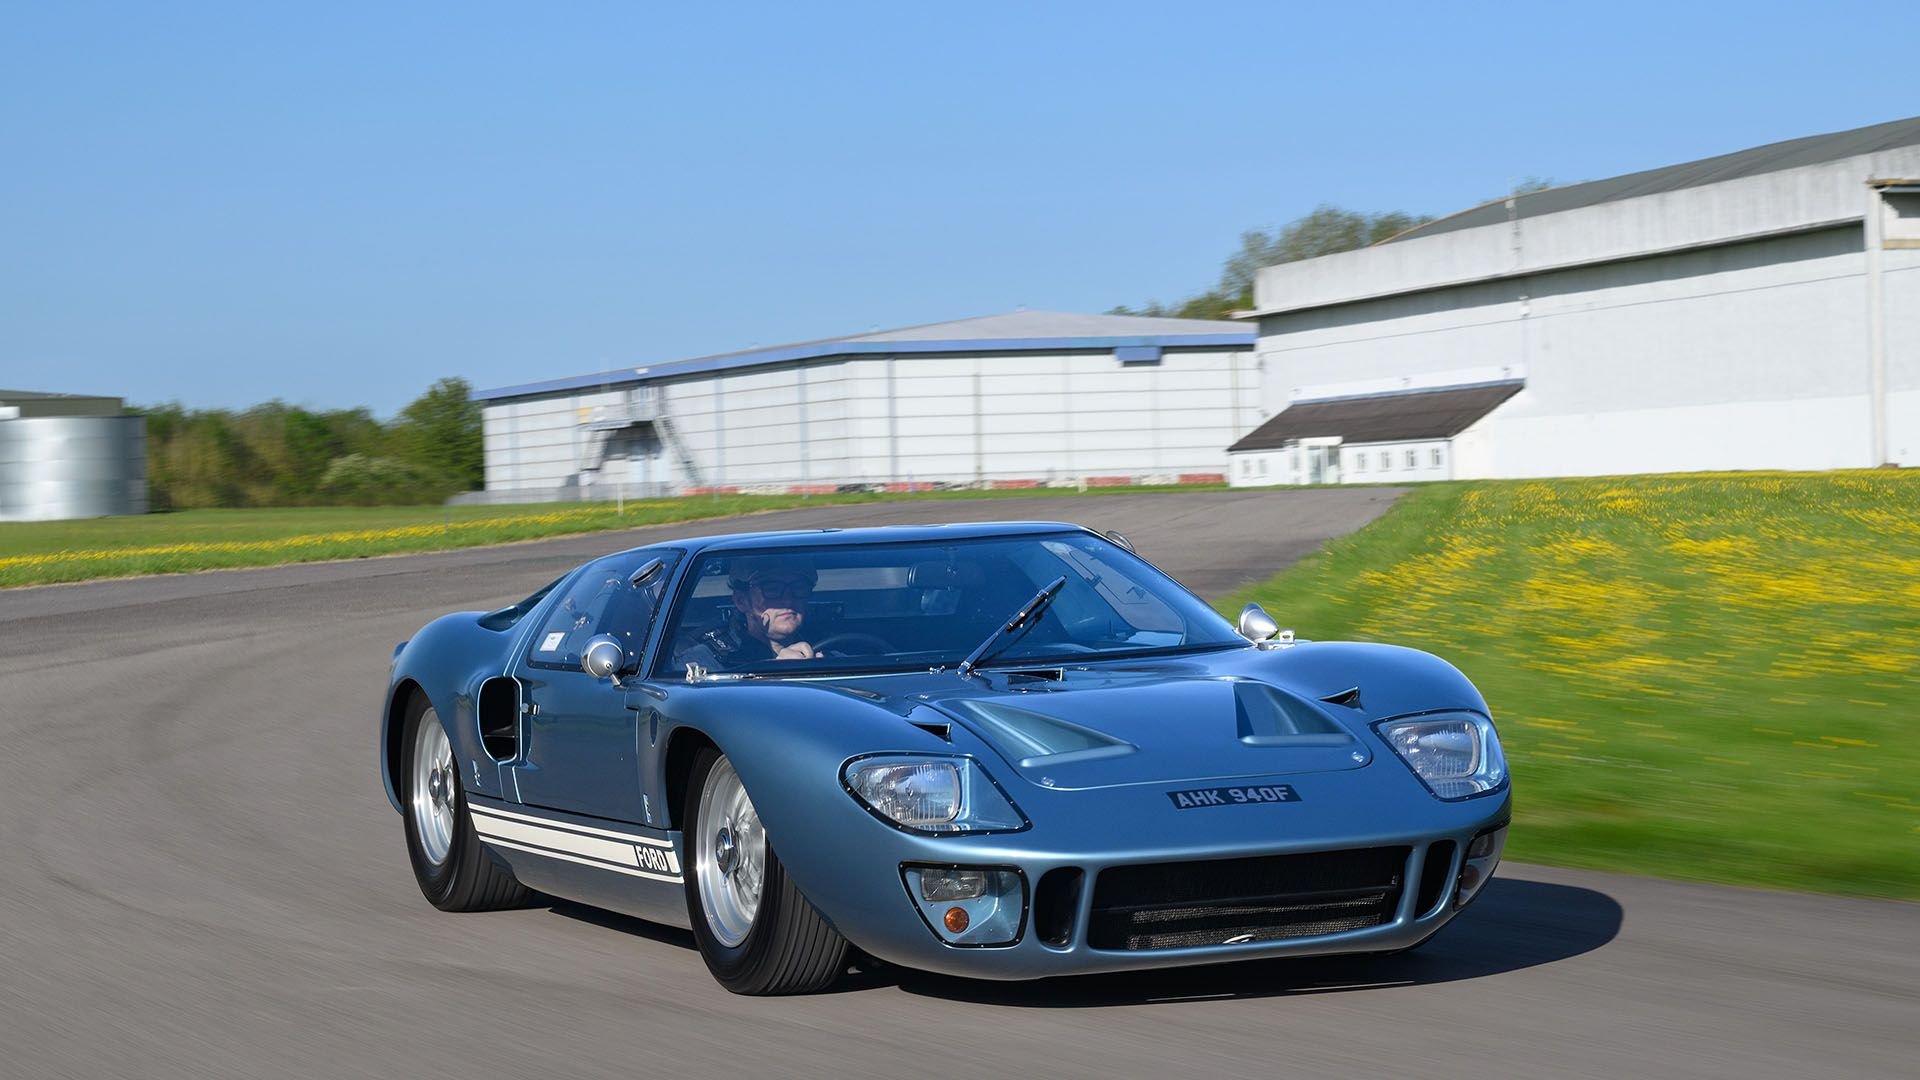 For Sale 1967 Ford GT40